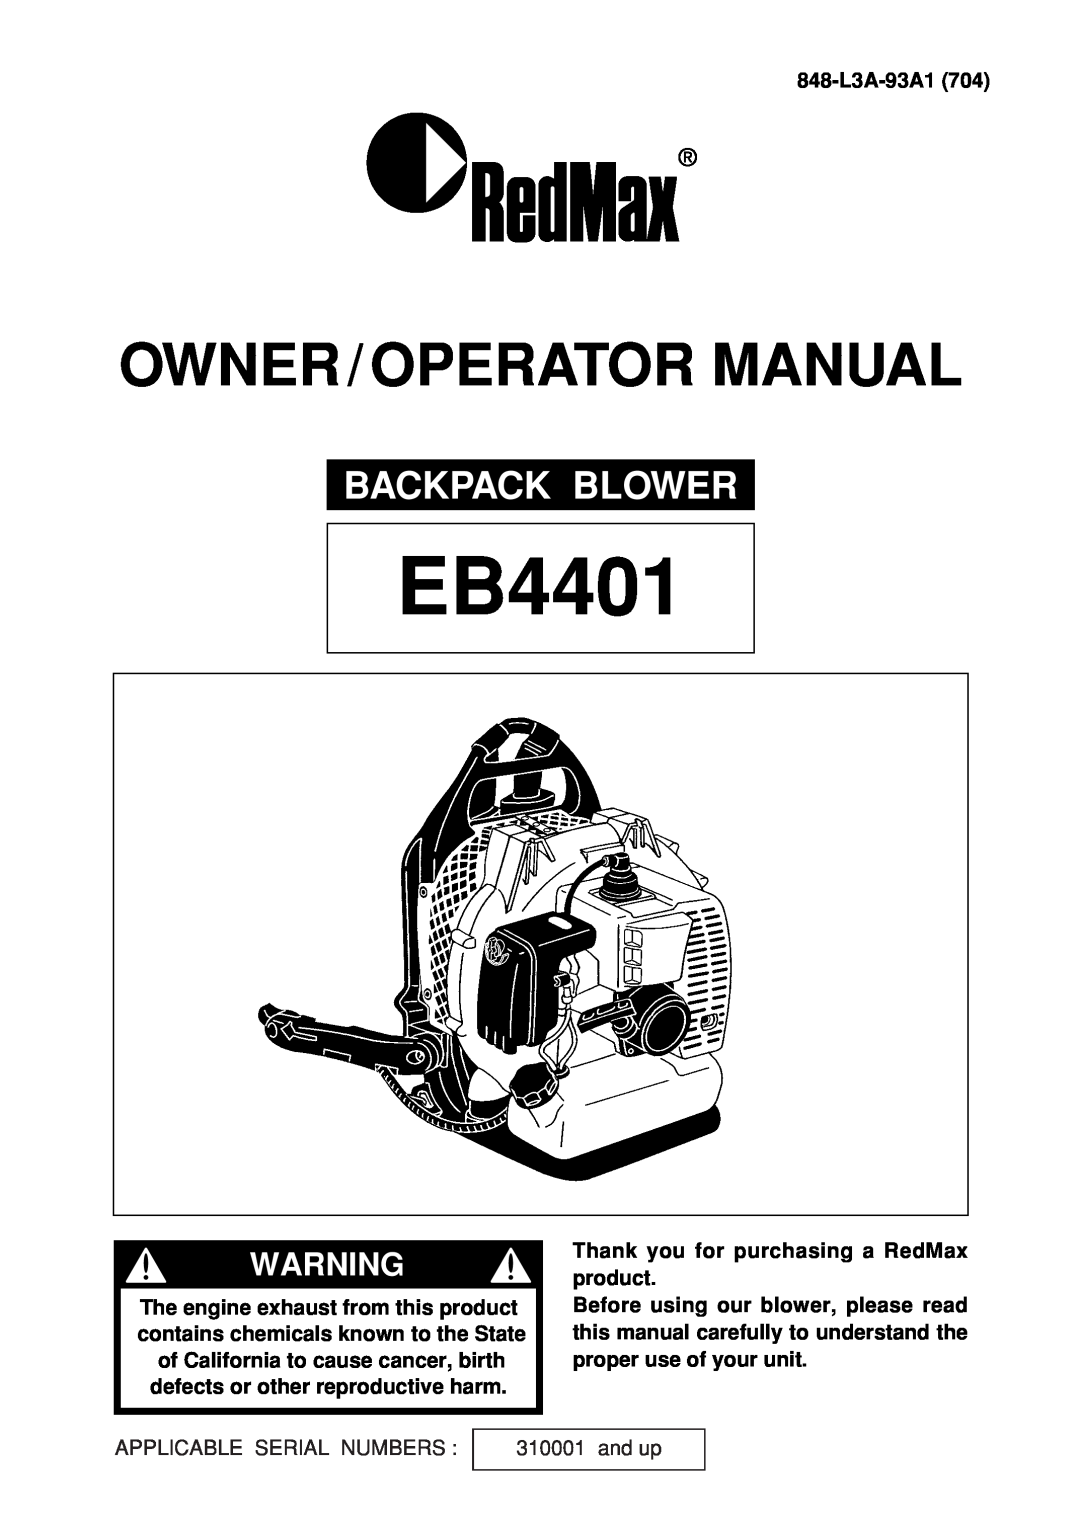 Zenoah EB4401 manual Backpack Blower, Owner/Operator Manual, 848-L3A-93A1, Thank you for purchasing a RedMax product 